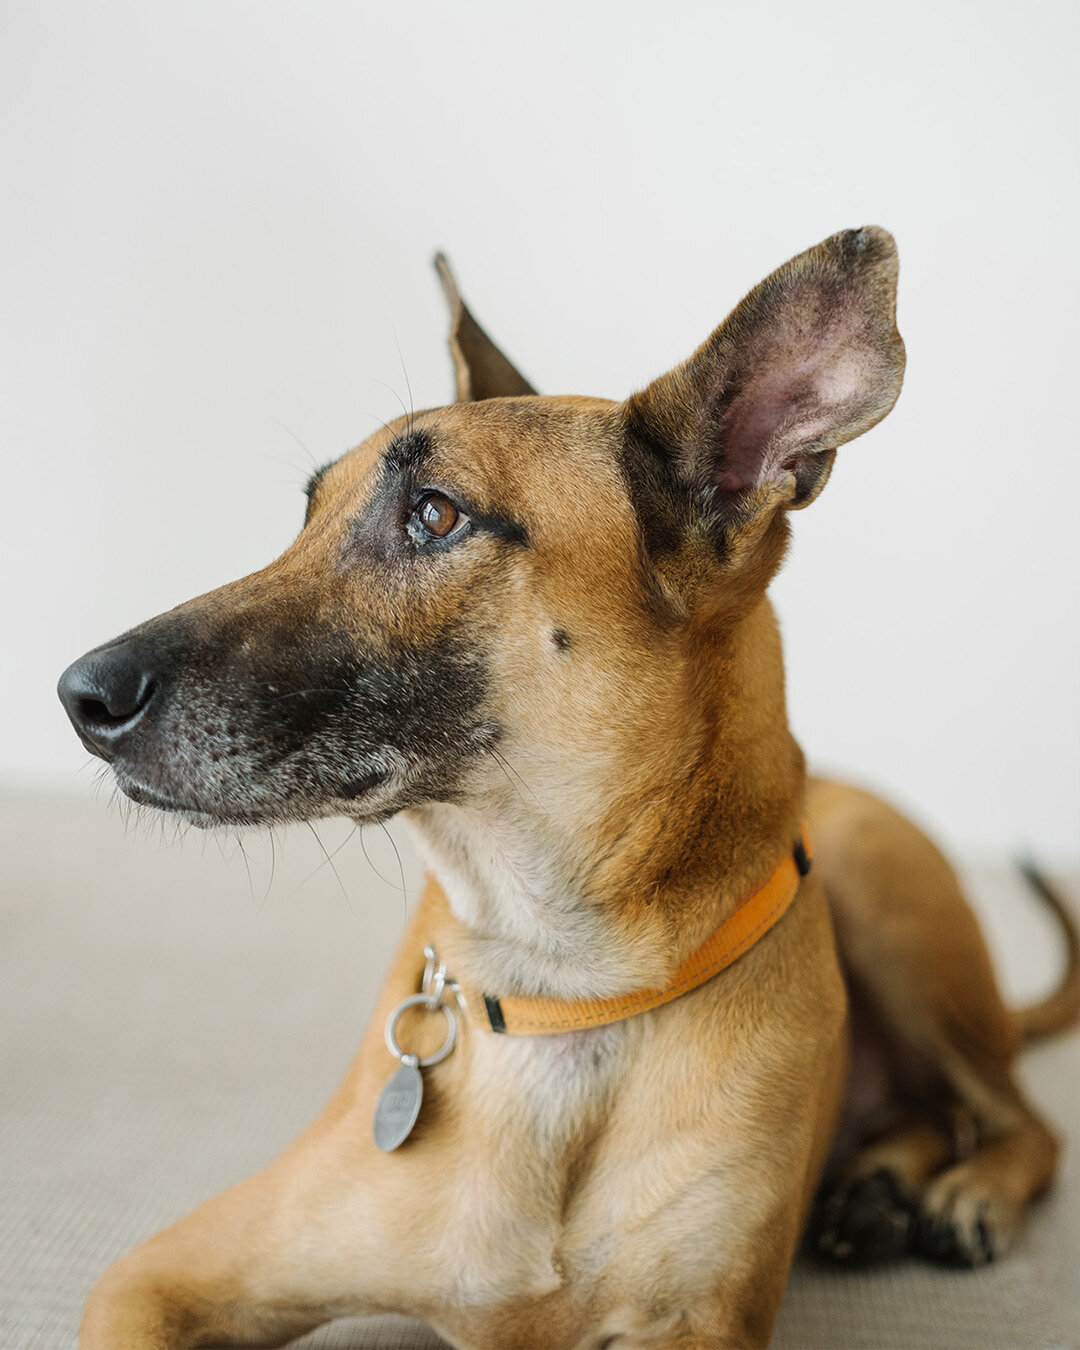 𓃢 Fitch is a mongrel adopted from a shelter and he became a big brother to a baby boy almost a year ago! He was really excited during the family photoshoot and loved sitting on the mat so much that even when we moved to another corner of the studio,